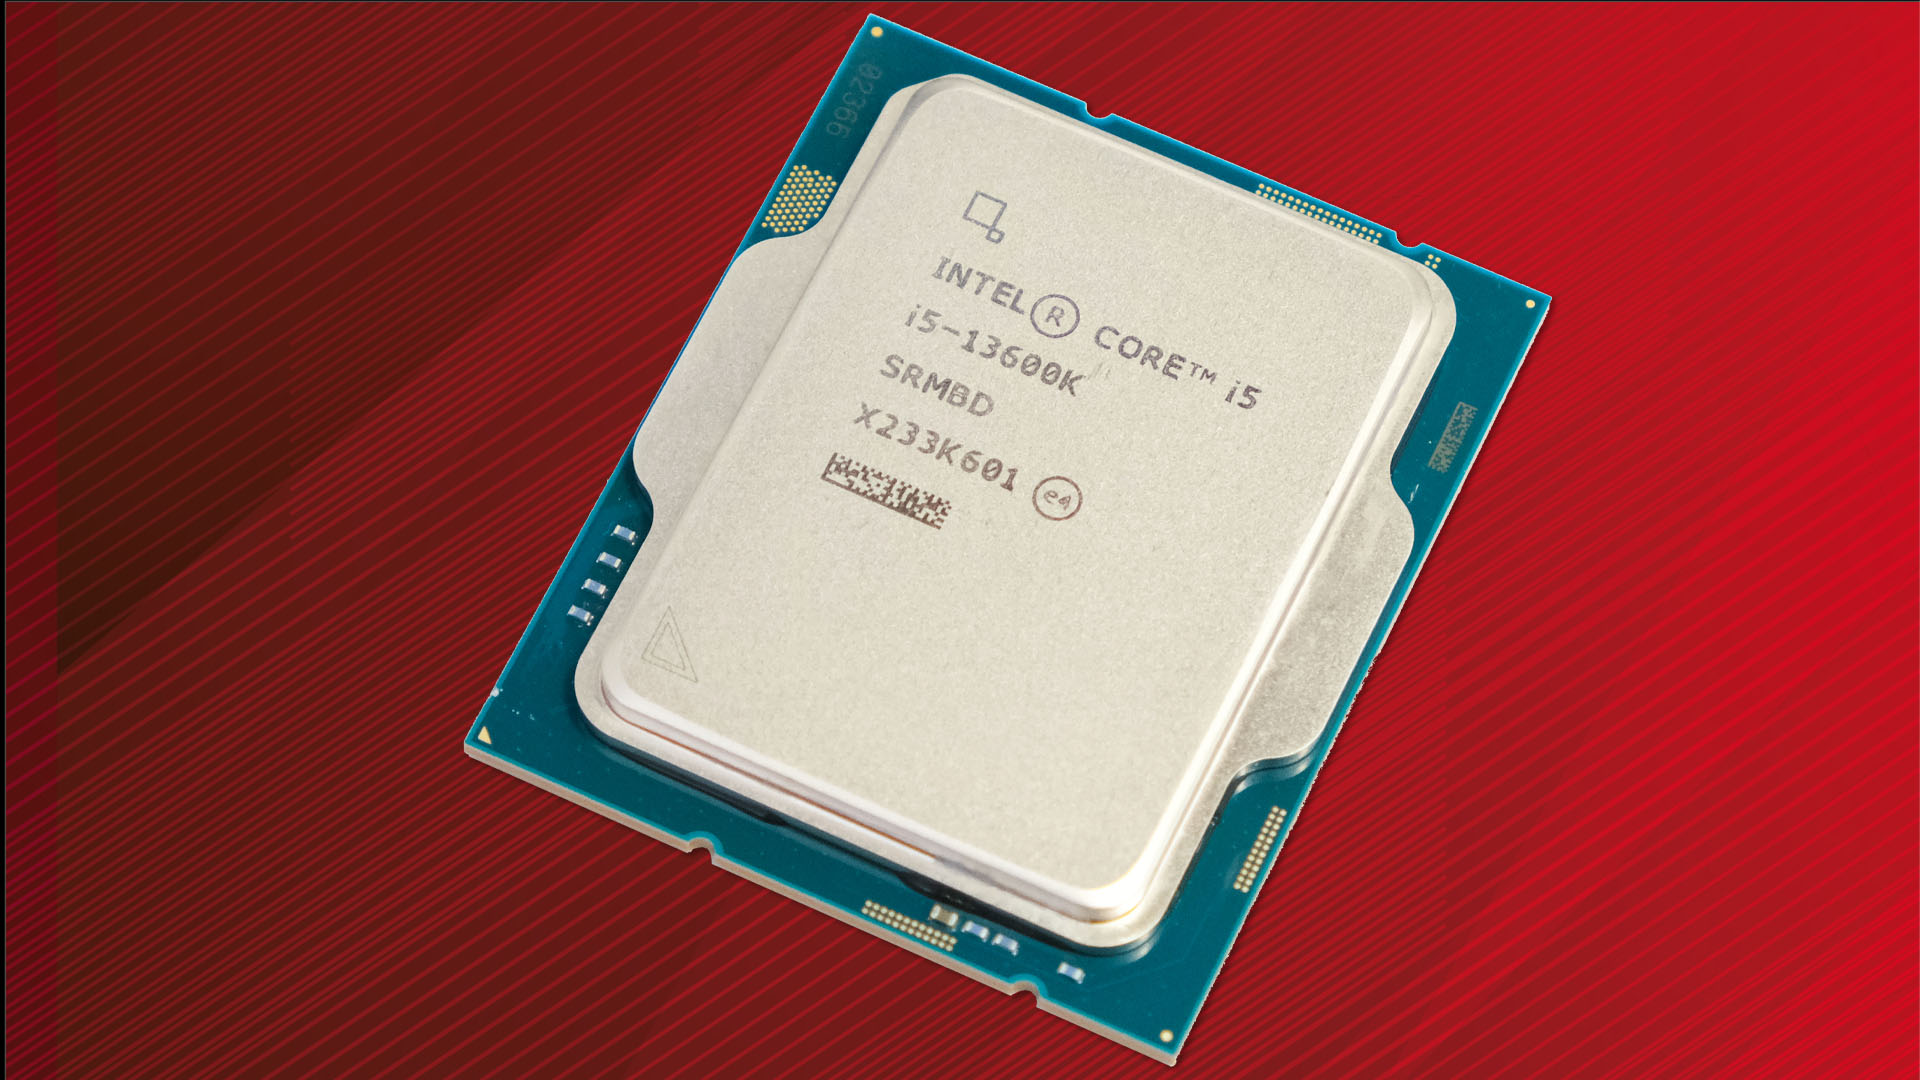 Intel's Core i5 is the best bargain in CPUs right now, but which